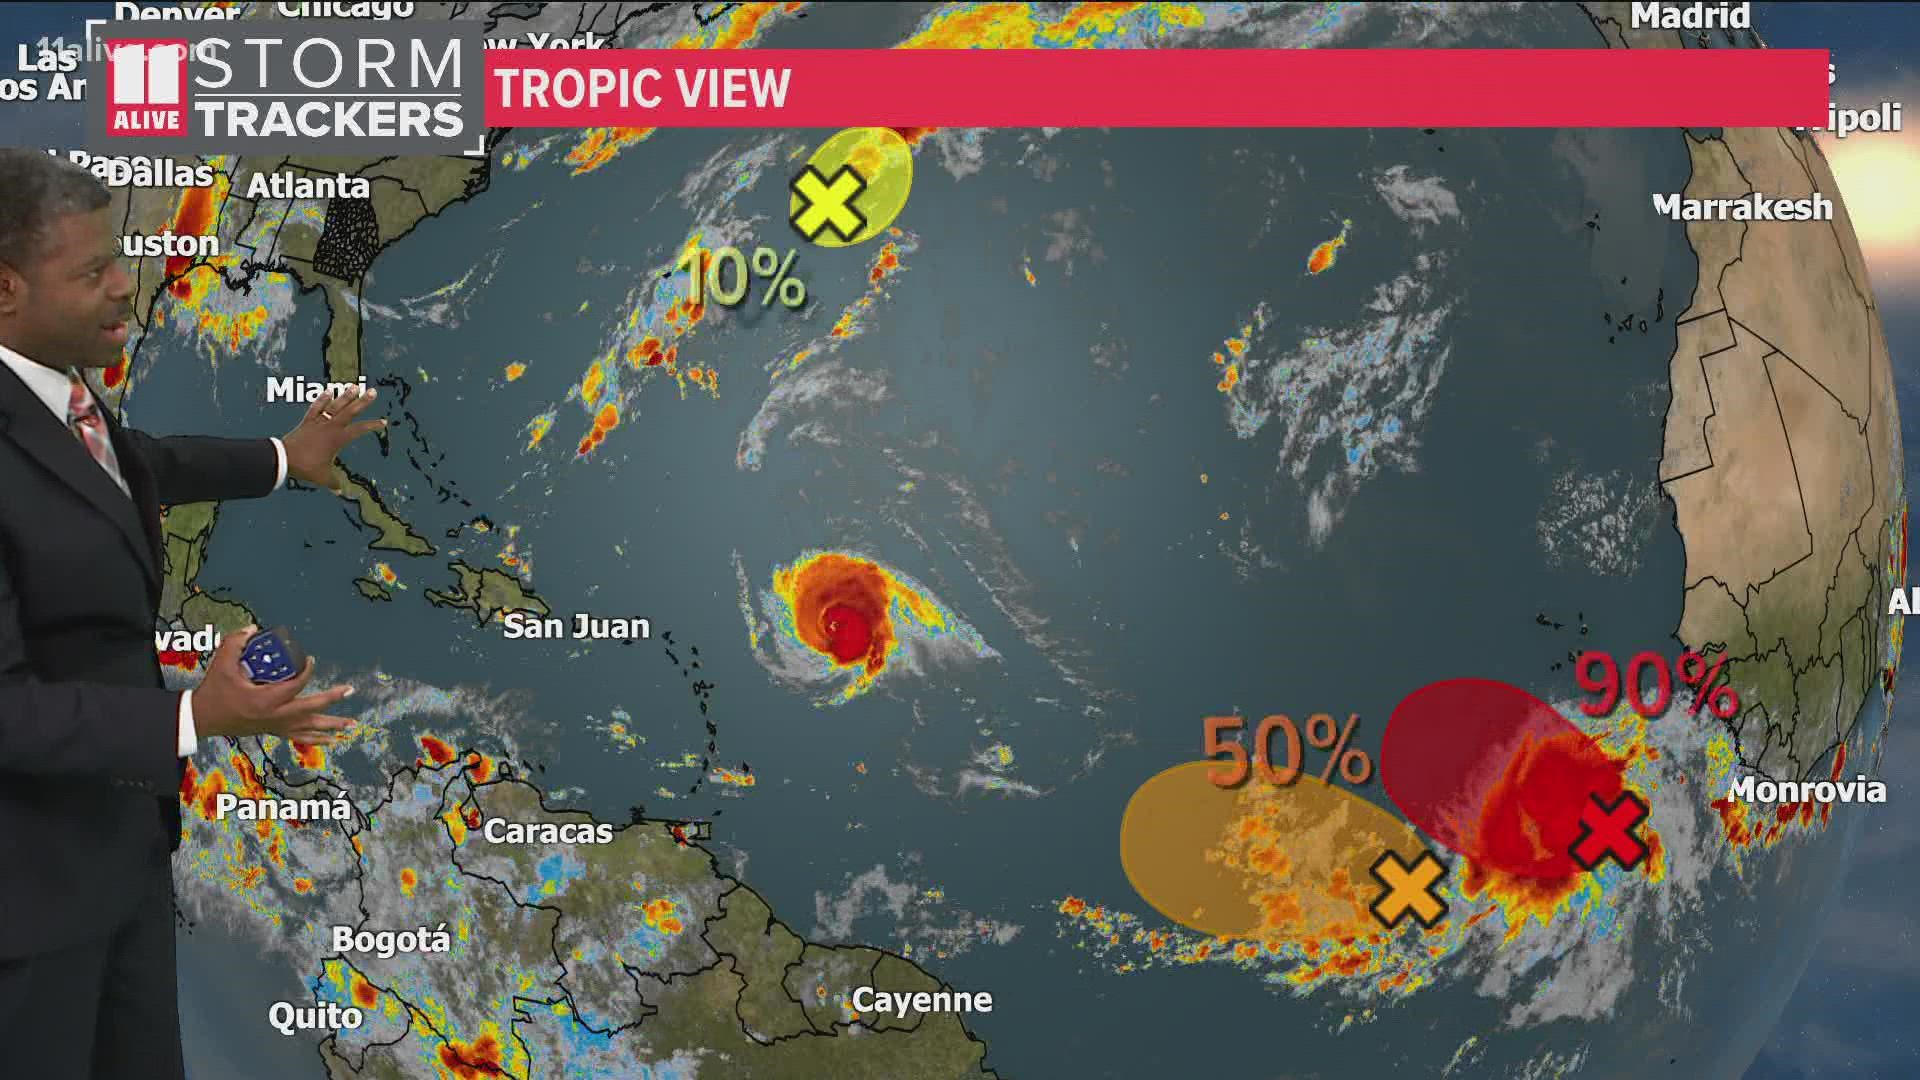 There are a few systems brewing in the Atlantic.